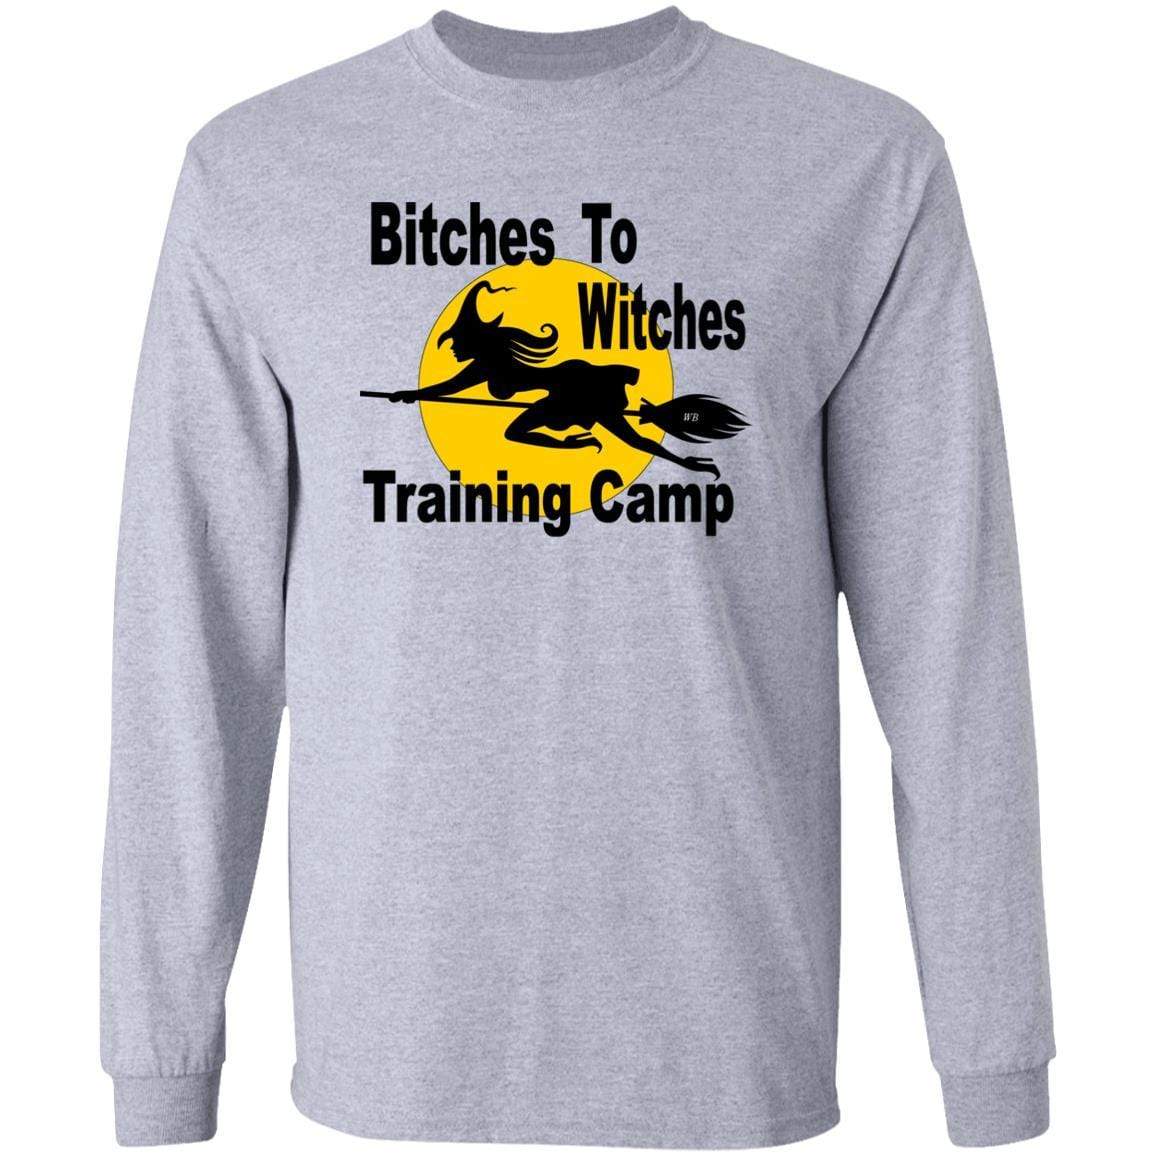 T-Shirts Sport Grey / S WineyBitches.Co "Bitches To Witches Training Camp" LS Ultra Cotton T-Shirt WineyBitchesCo